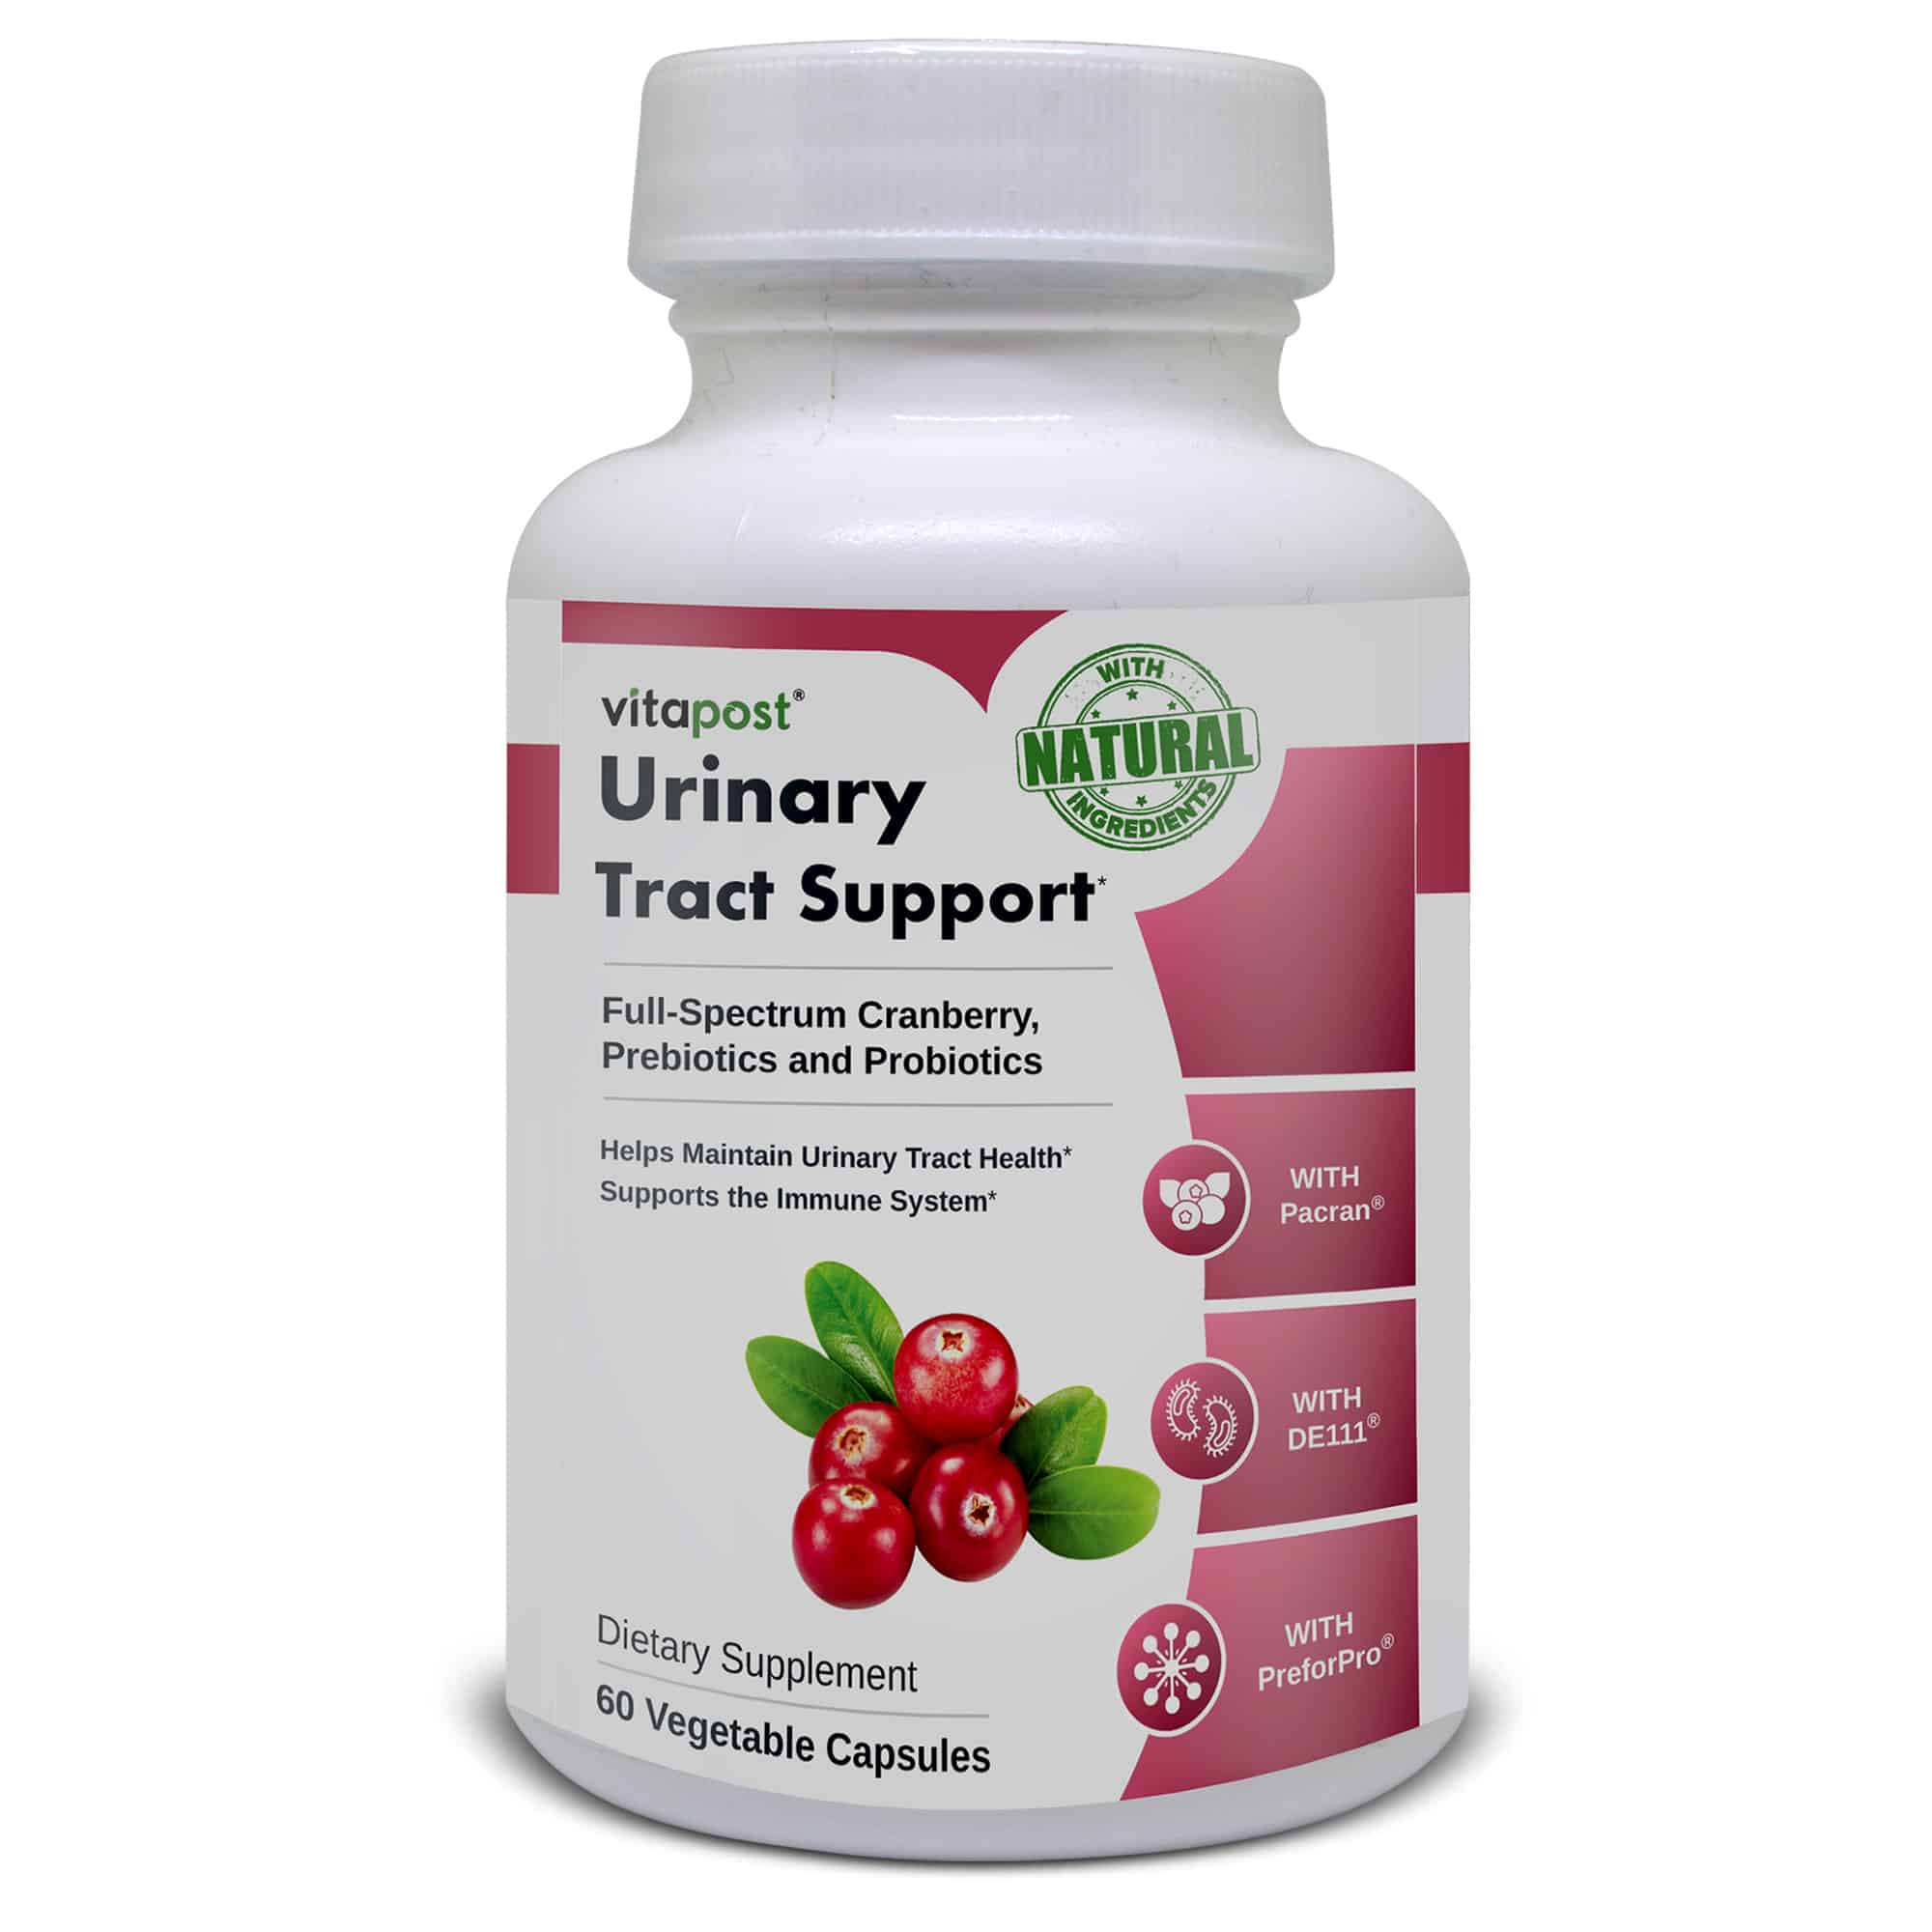 VitaPost Urinary Tract Support. Cranberry, Pro